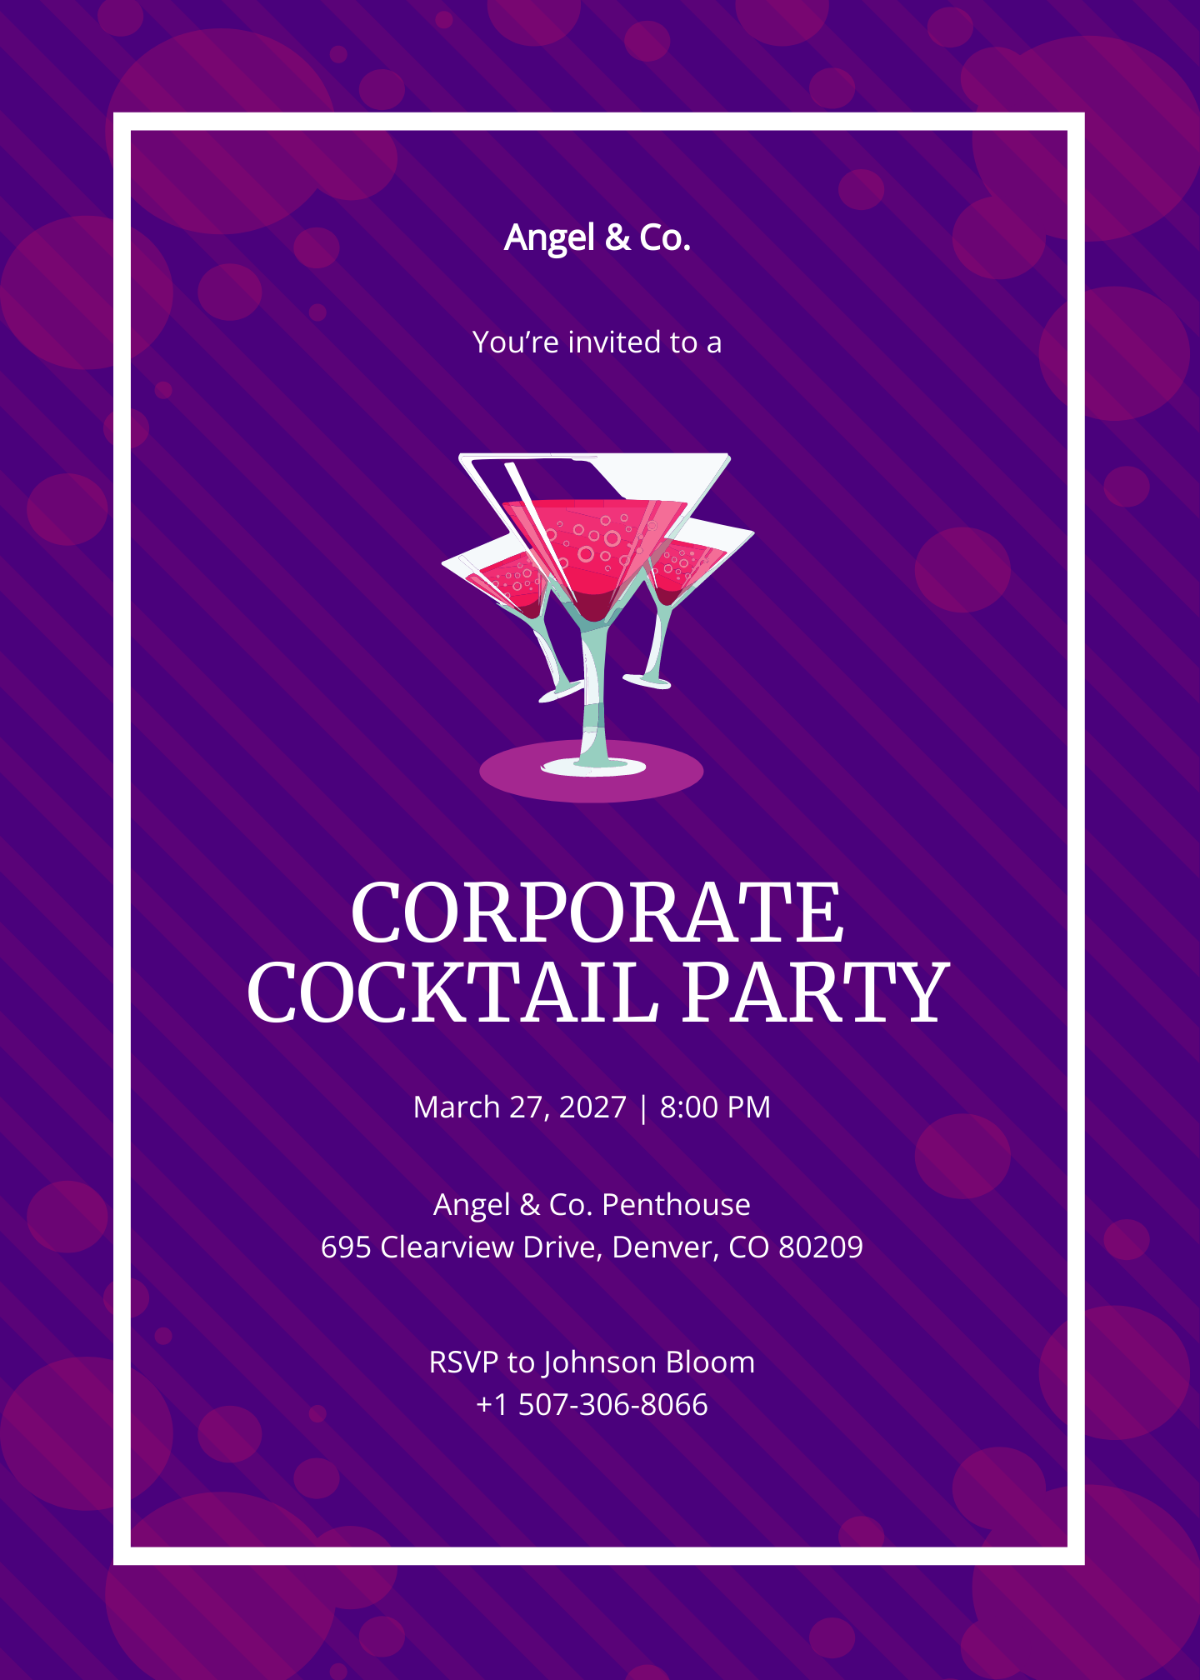 Retro Cocktail Party Poster Background Wallpaper Image For Free